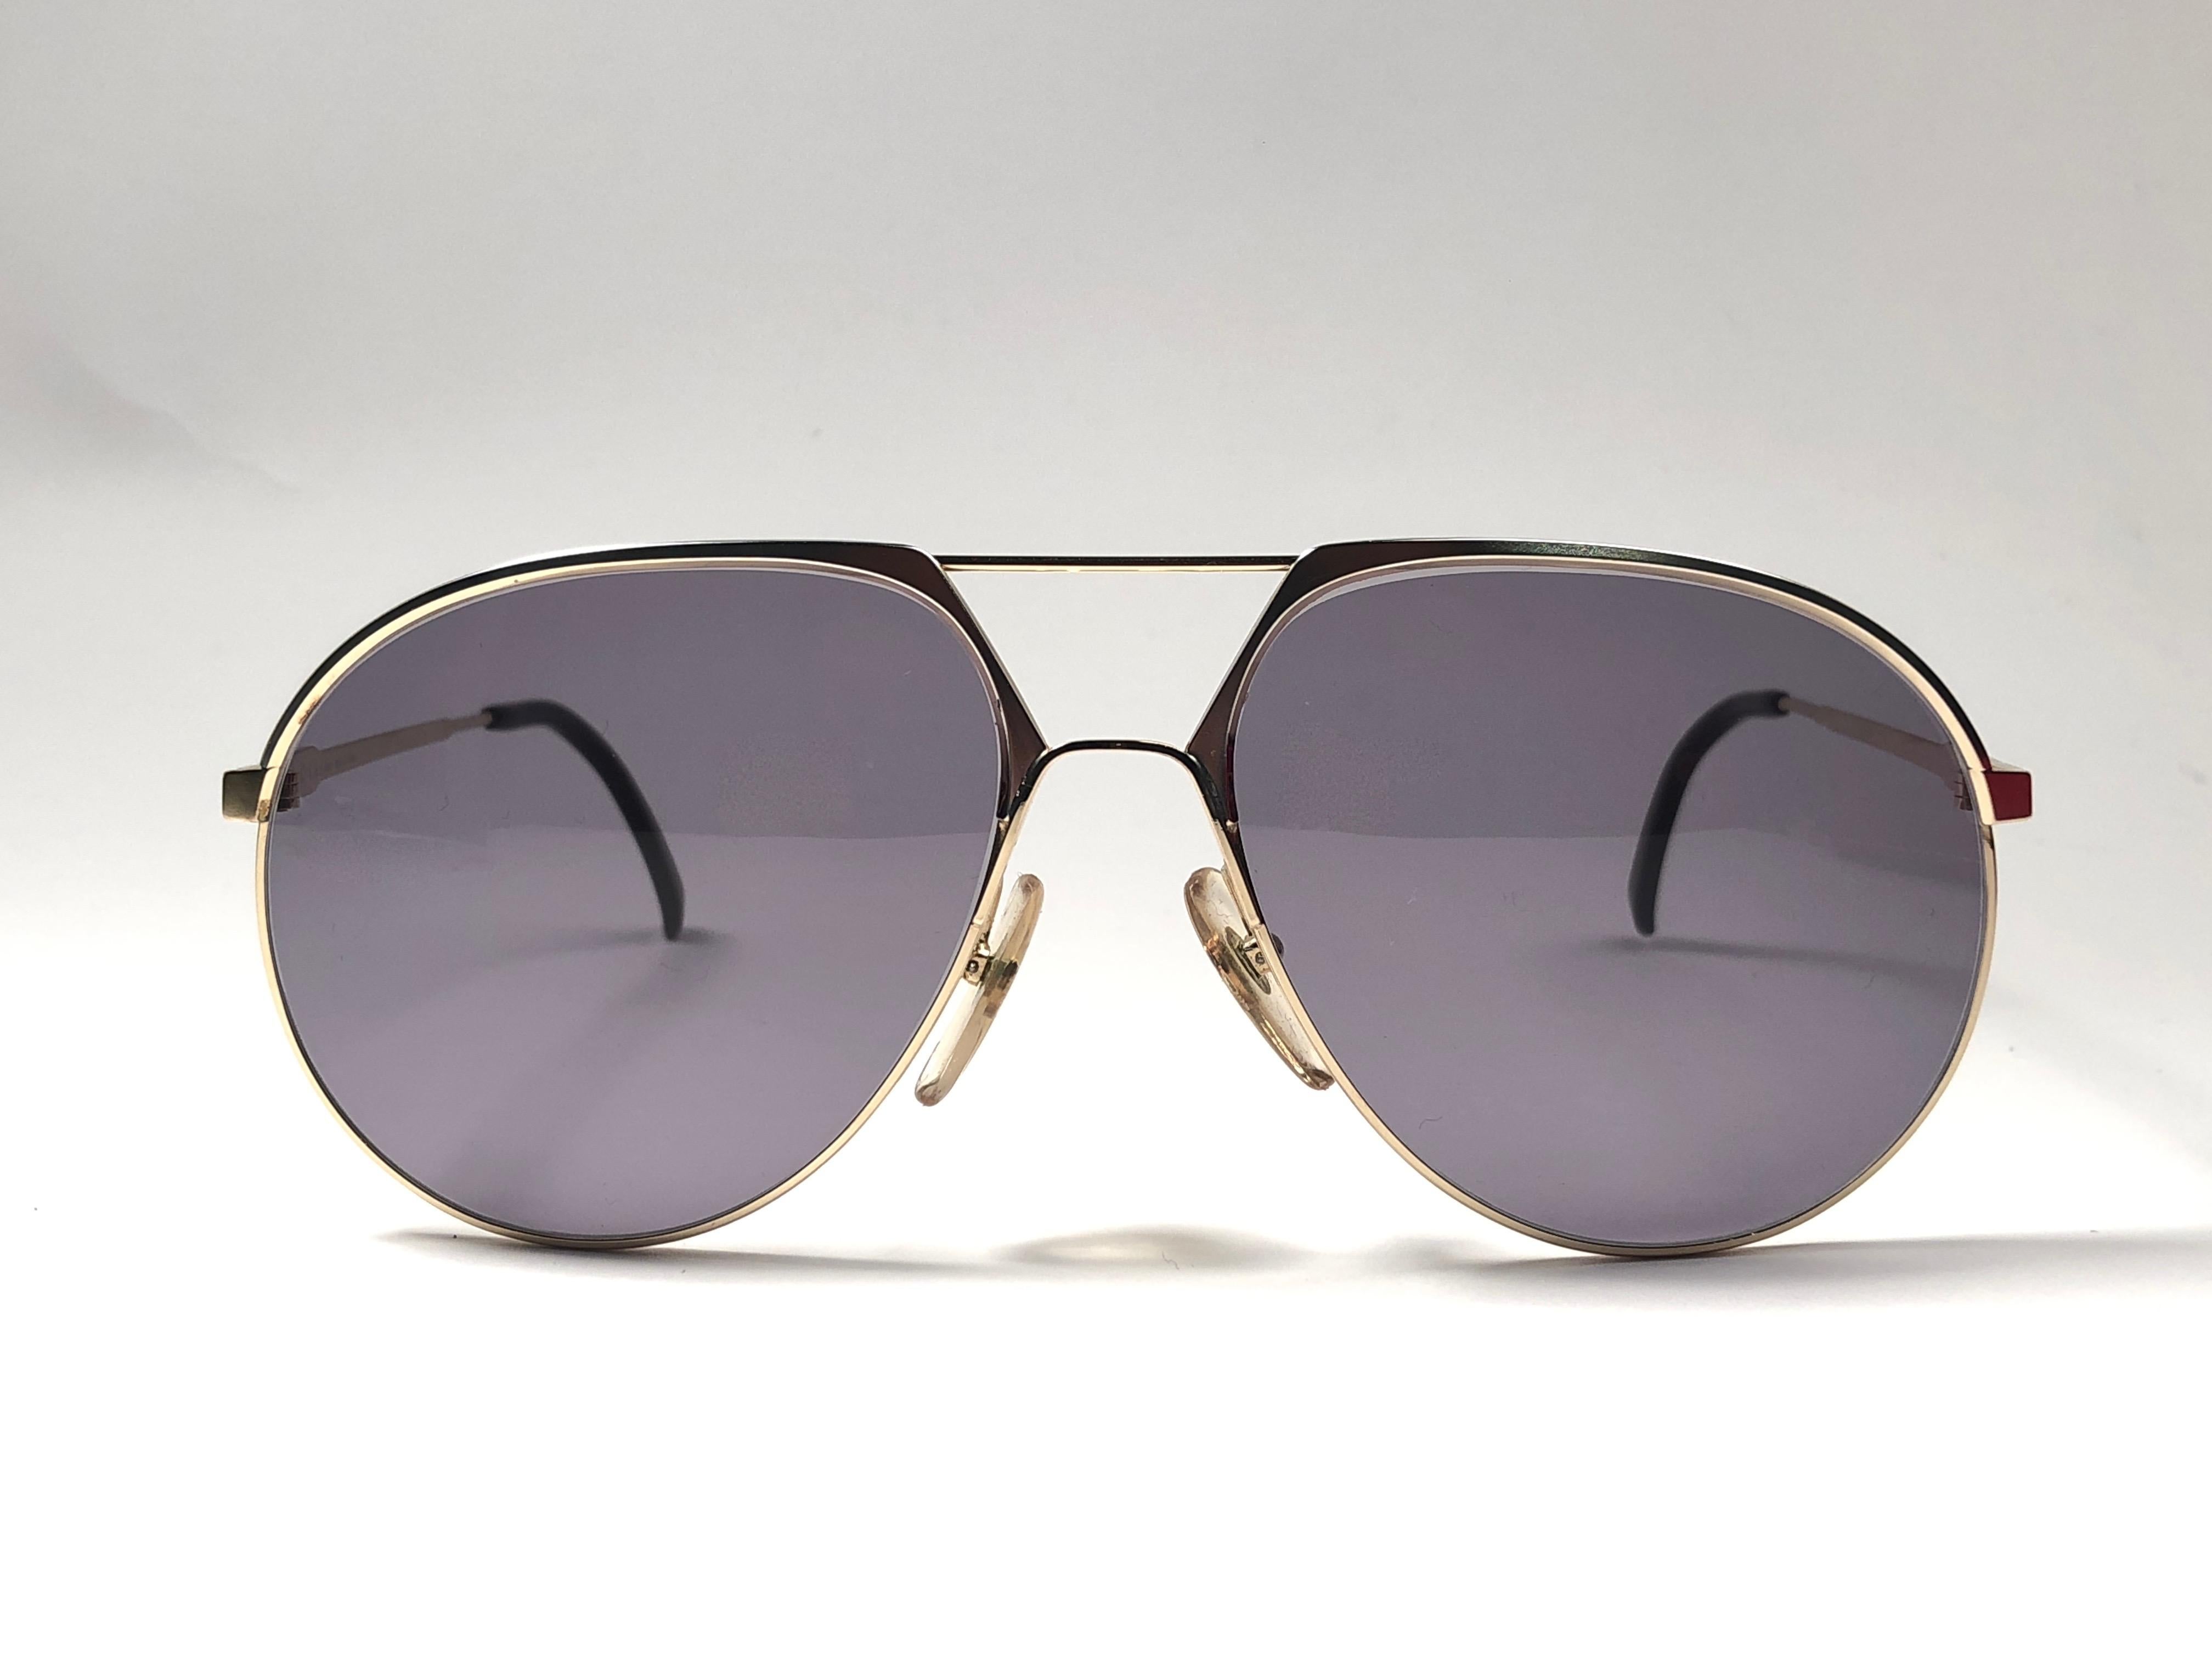 New vintage Christian Dior Monsieur gold sunglasses. .

Spotless grey lenses.

Comes with it original CD Monsieur sleeve.

New, never worn or displayed this item may show light sign of wear due to storage.

Made in Austria